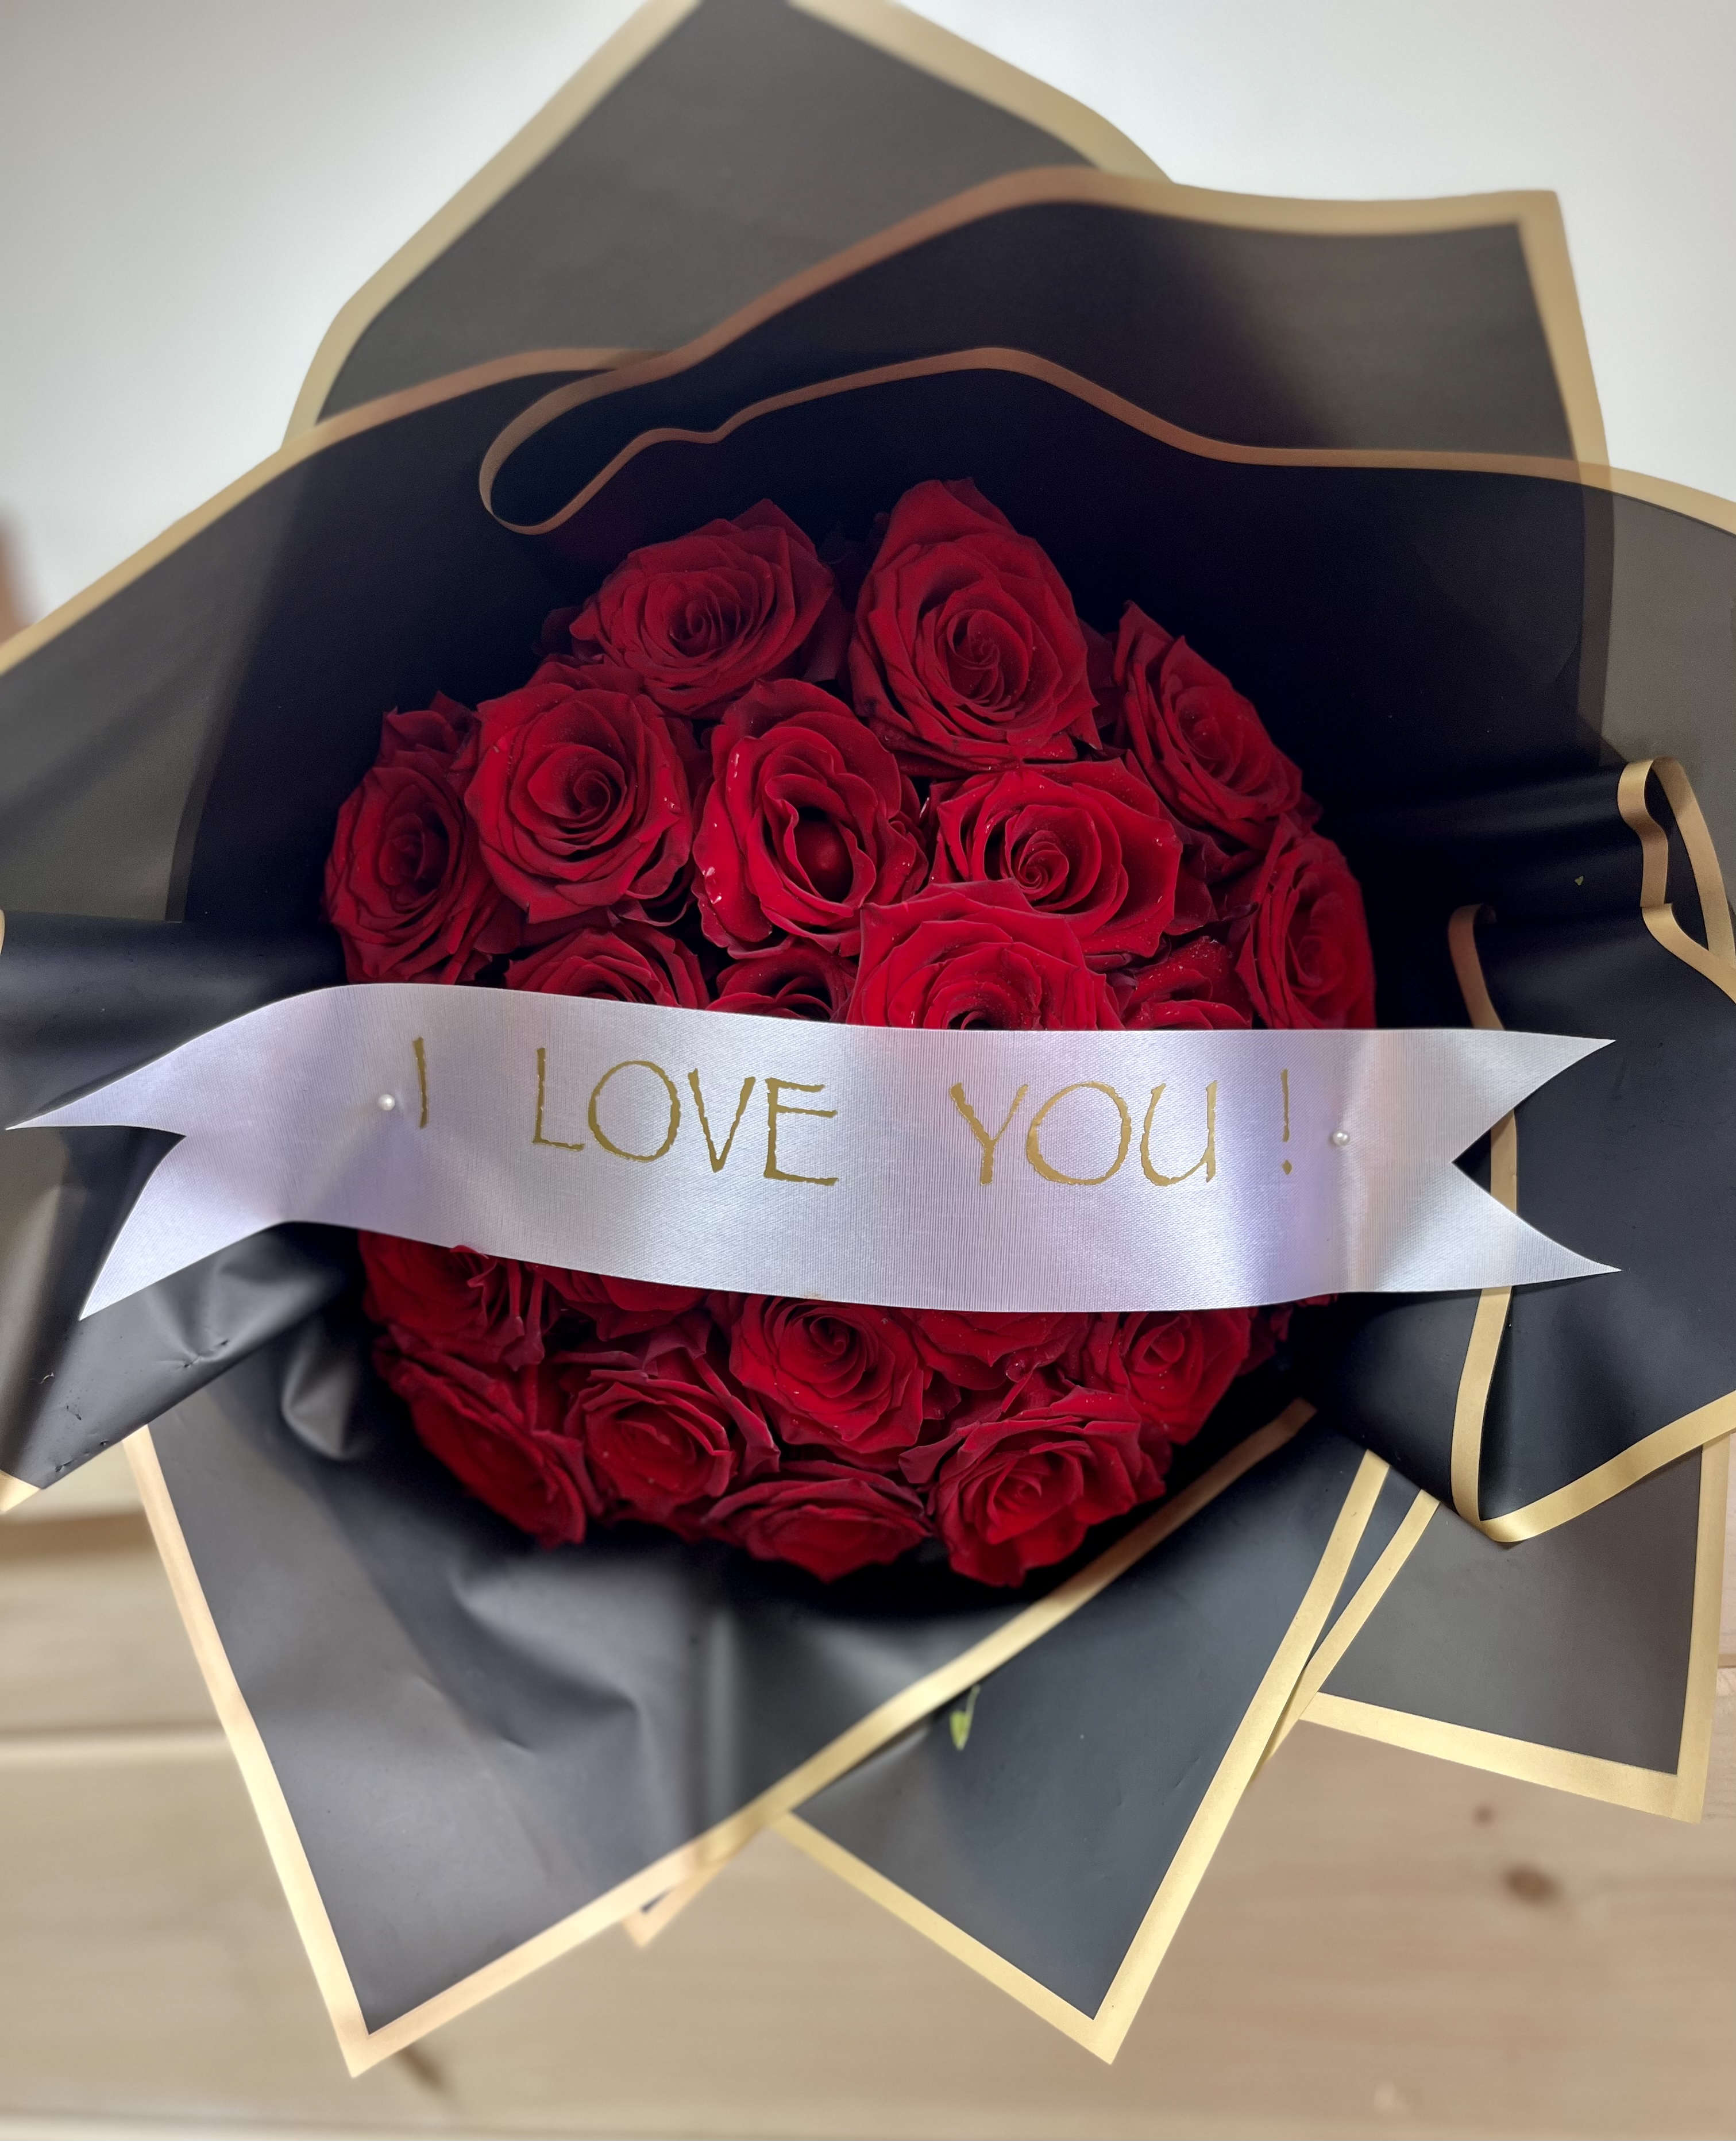 Ramo de Rosas  - Bouquet of 24 premium long stem Red Roses can be done in white, pink or purple as well as a mix of colors, please specify your selection of colors &amp; message banner in the special notes.    